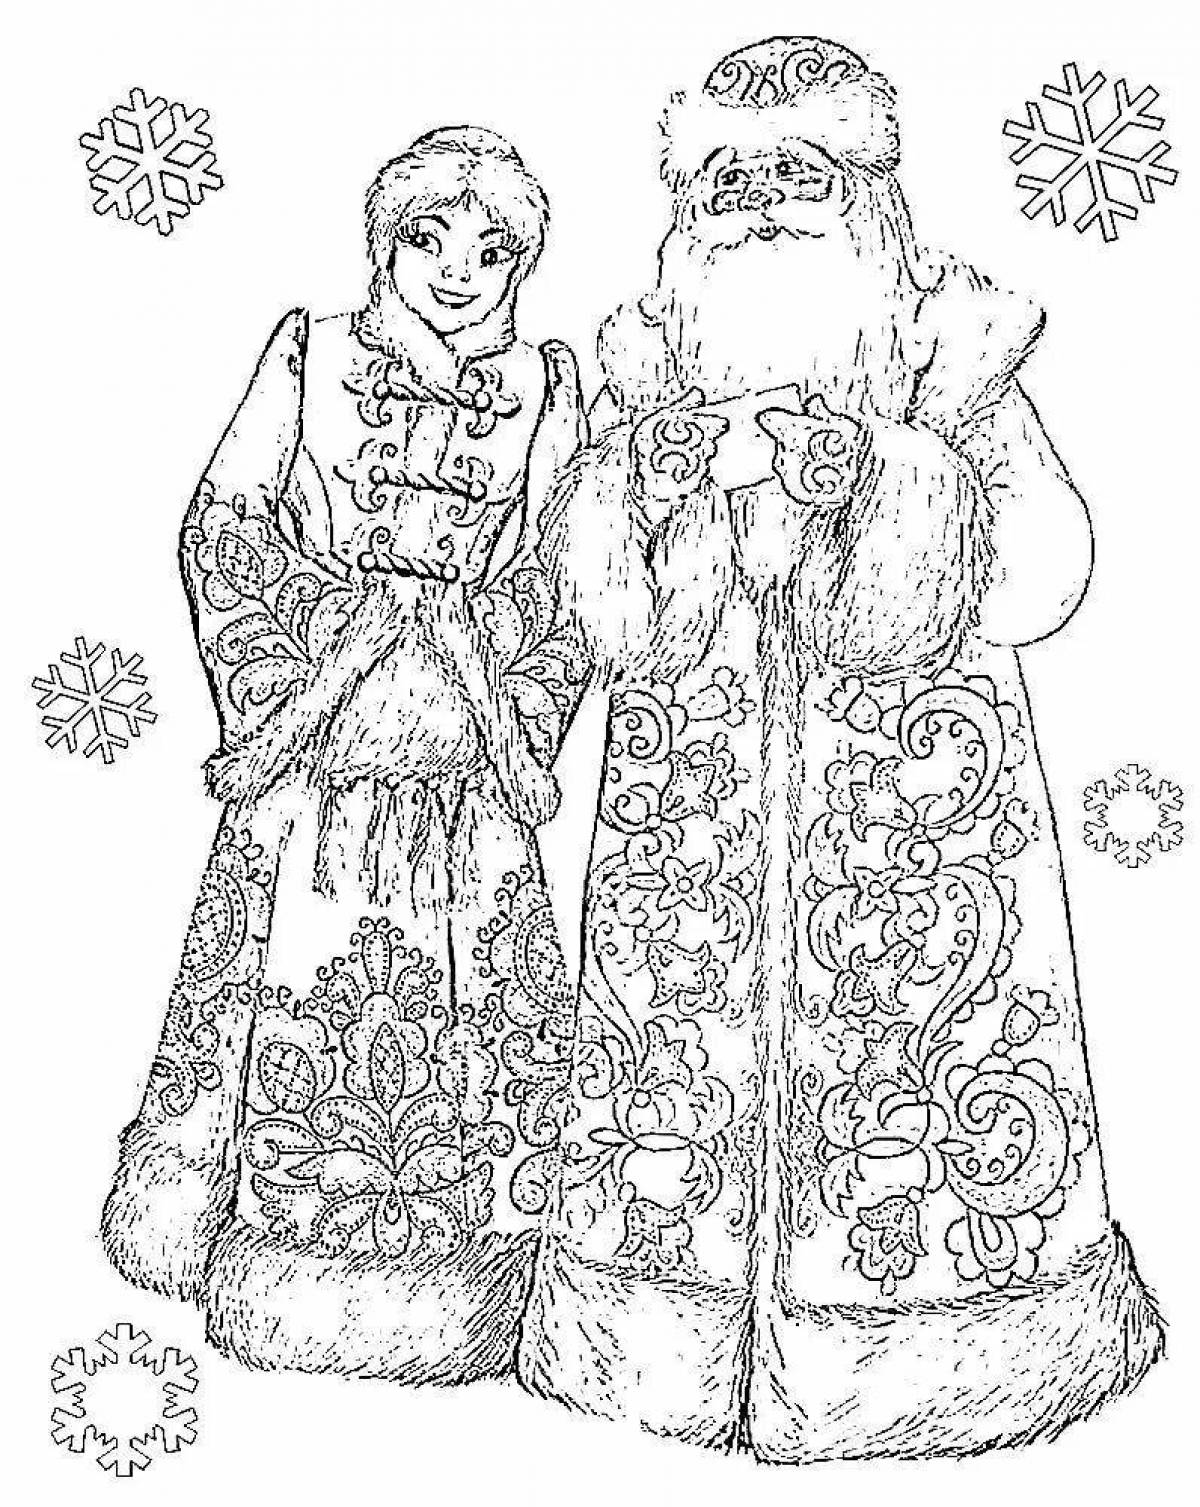 Dazzling Santa Claus and Snow Maiden coloring book